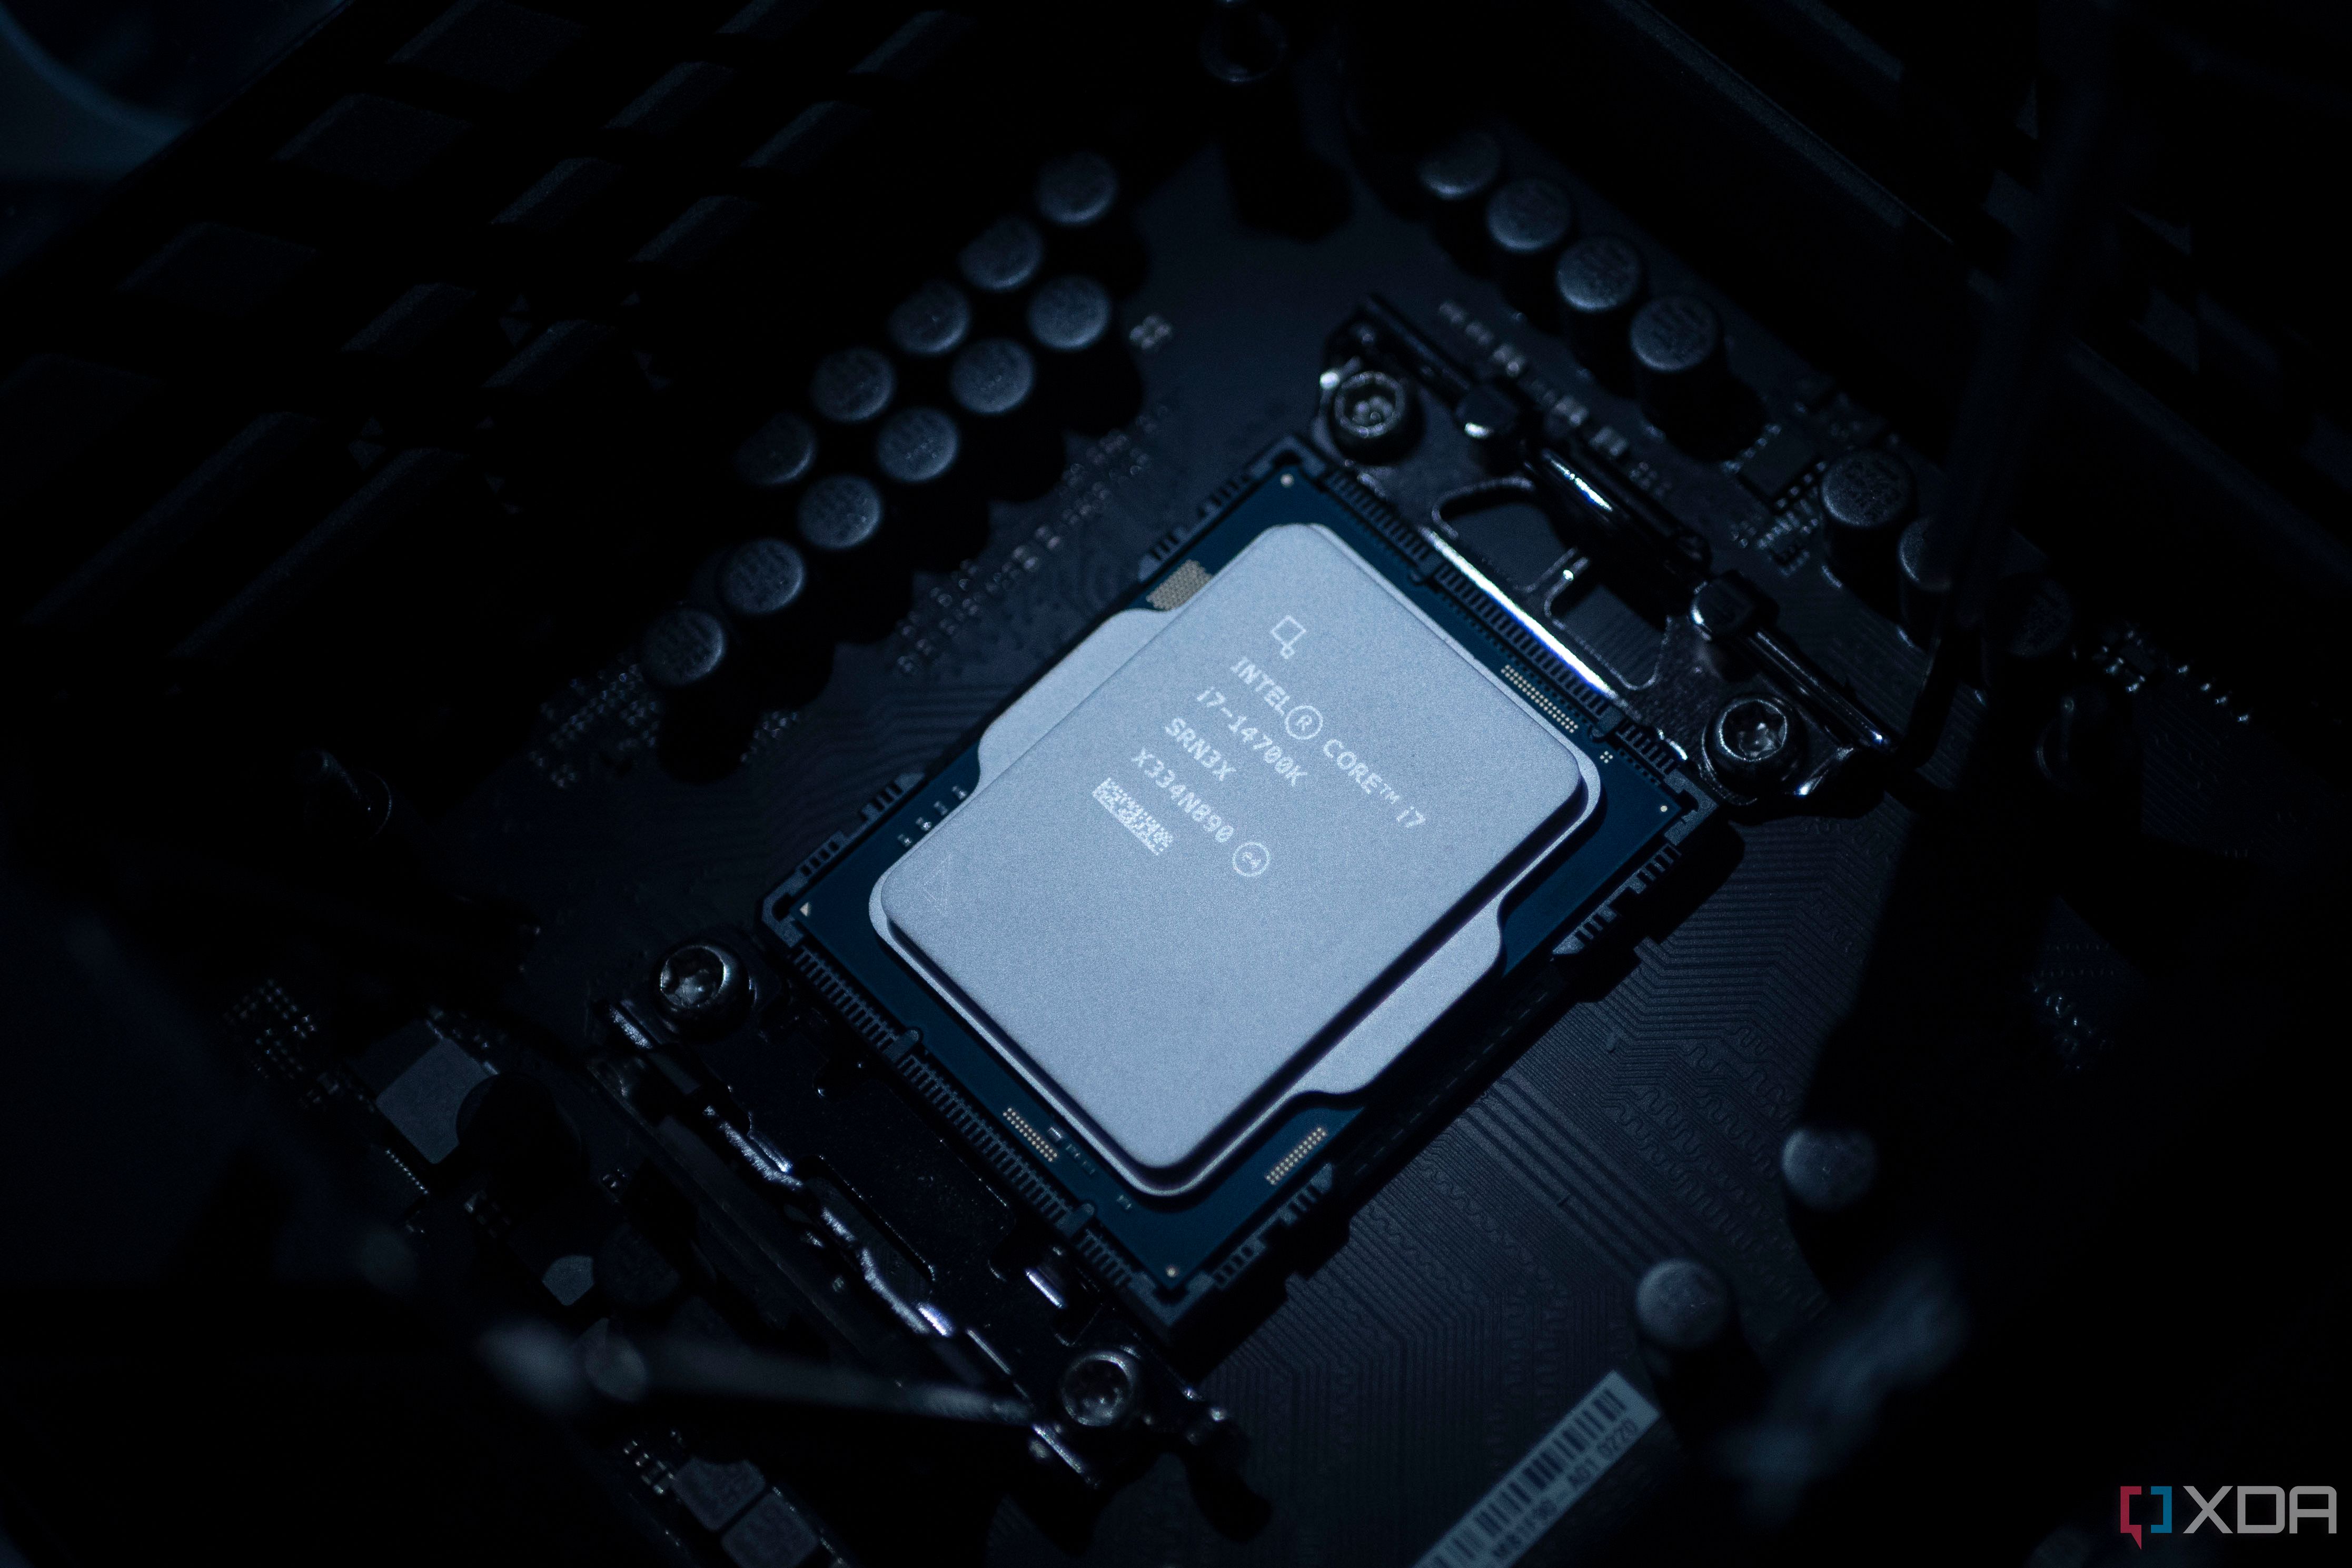 Alleged Intel Core i7-14700K processor is 17% faster than 13700K